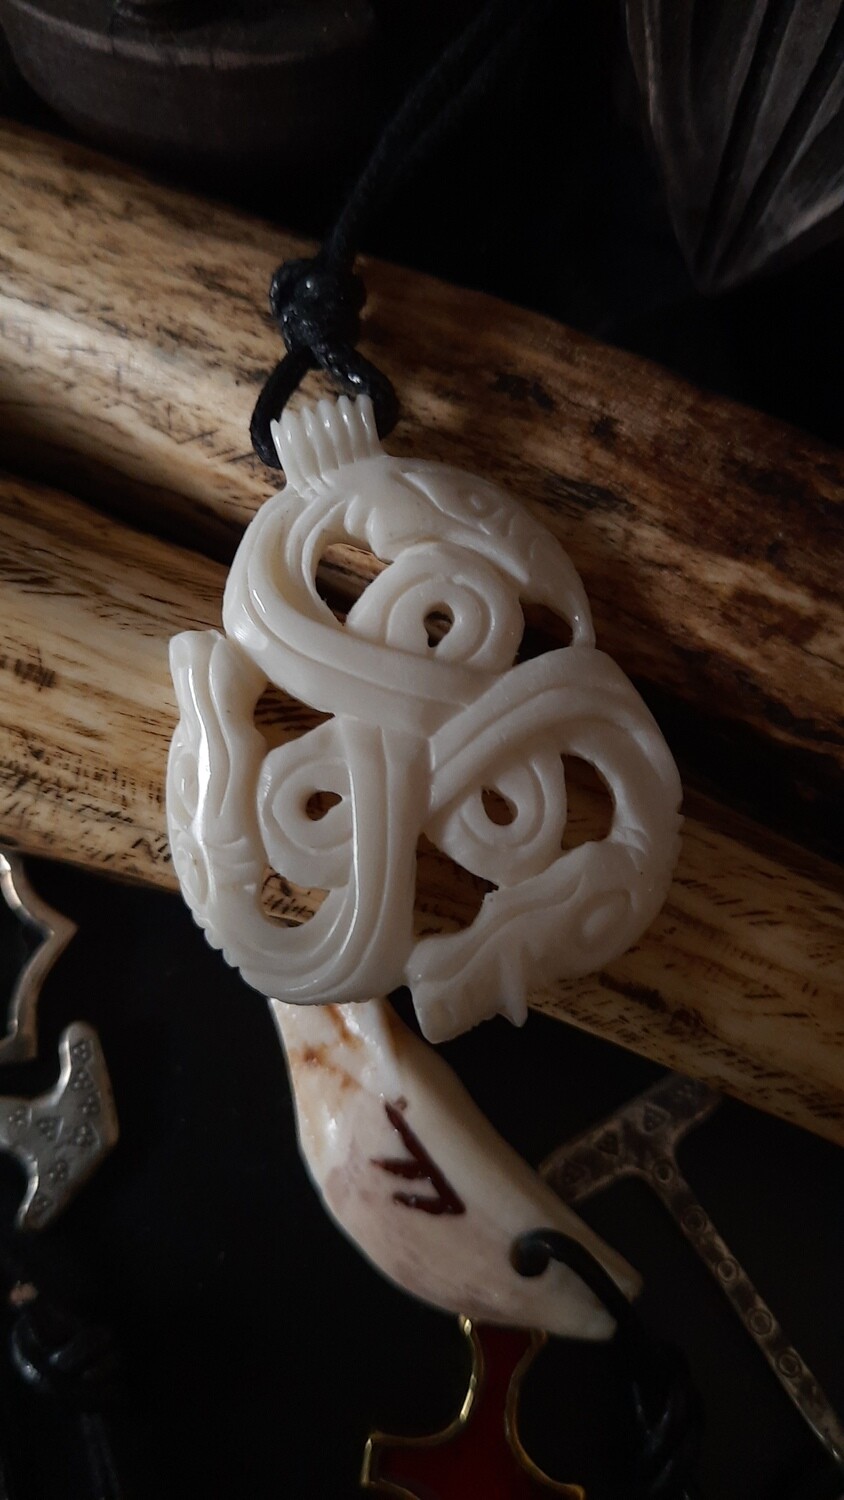 OFFER: Vikings Triskelion Bone Pendant: The Dragon, Odin's Raven and Wolf Norse Pagan Amulet